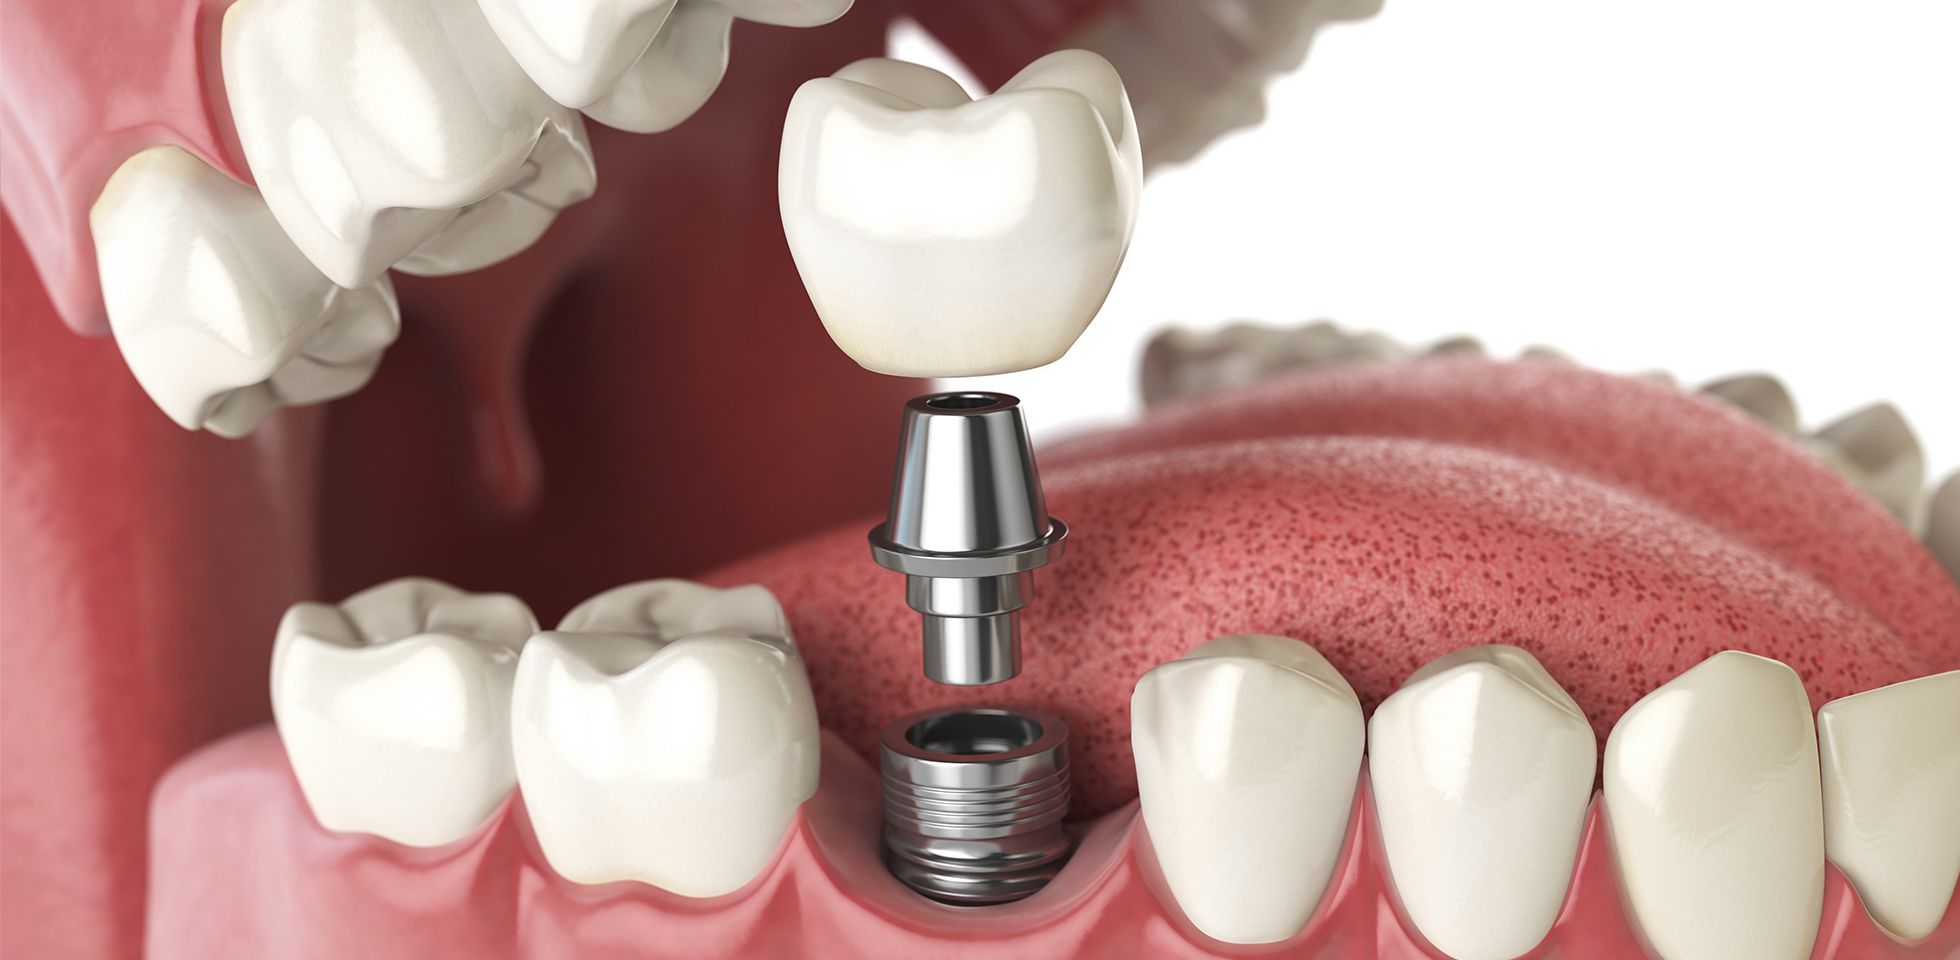 How to Care for Your Dental Implant